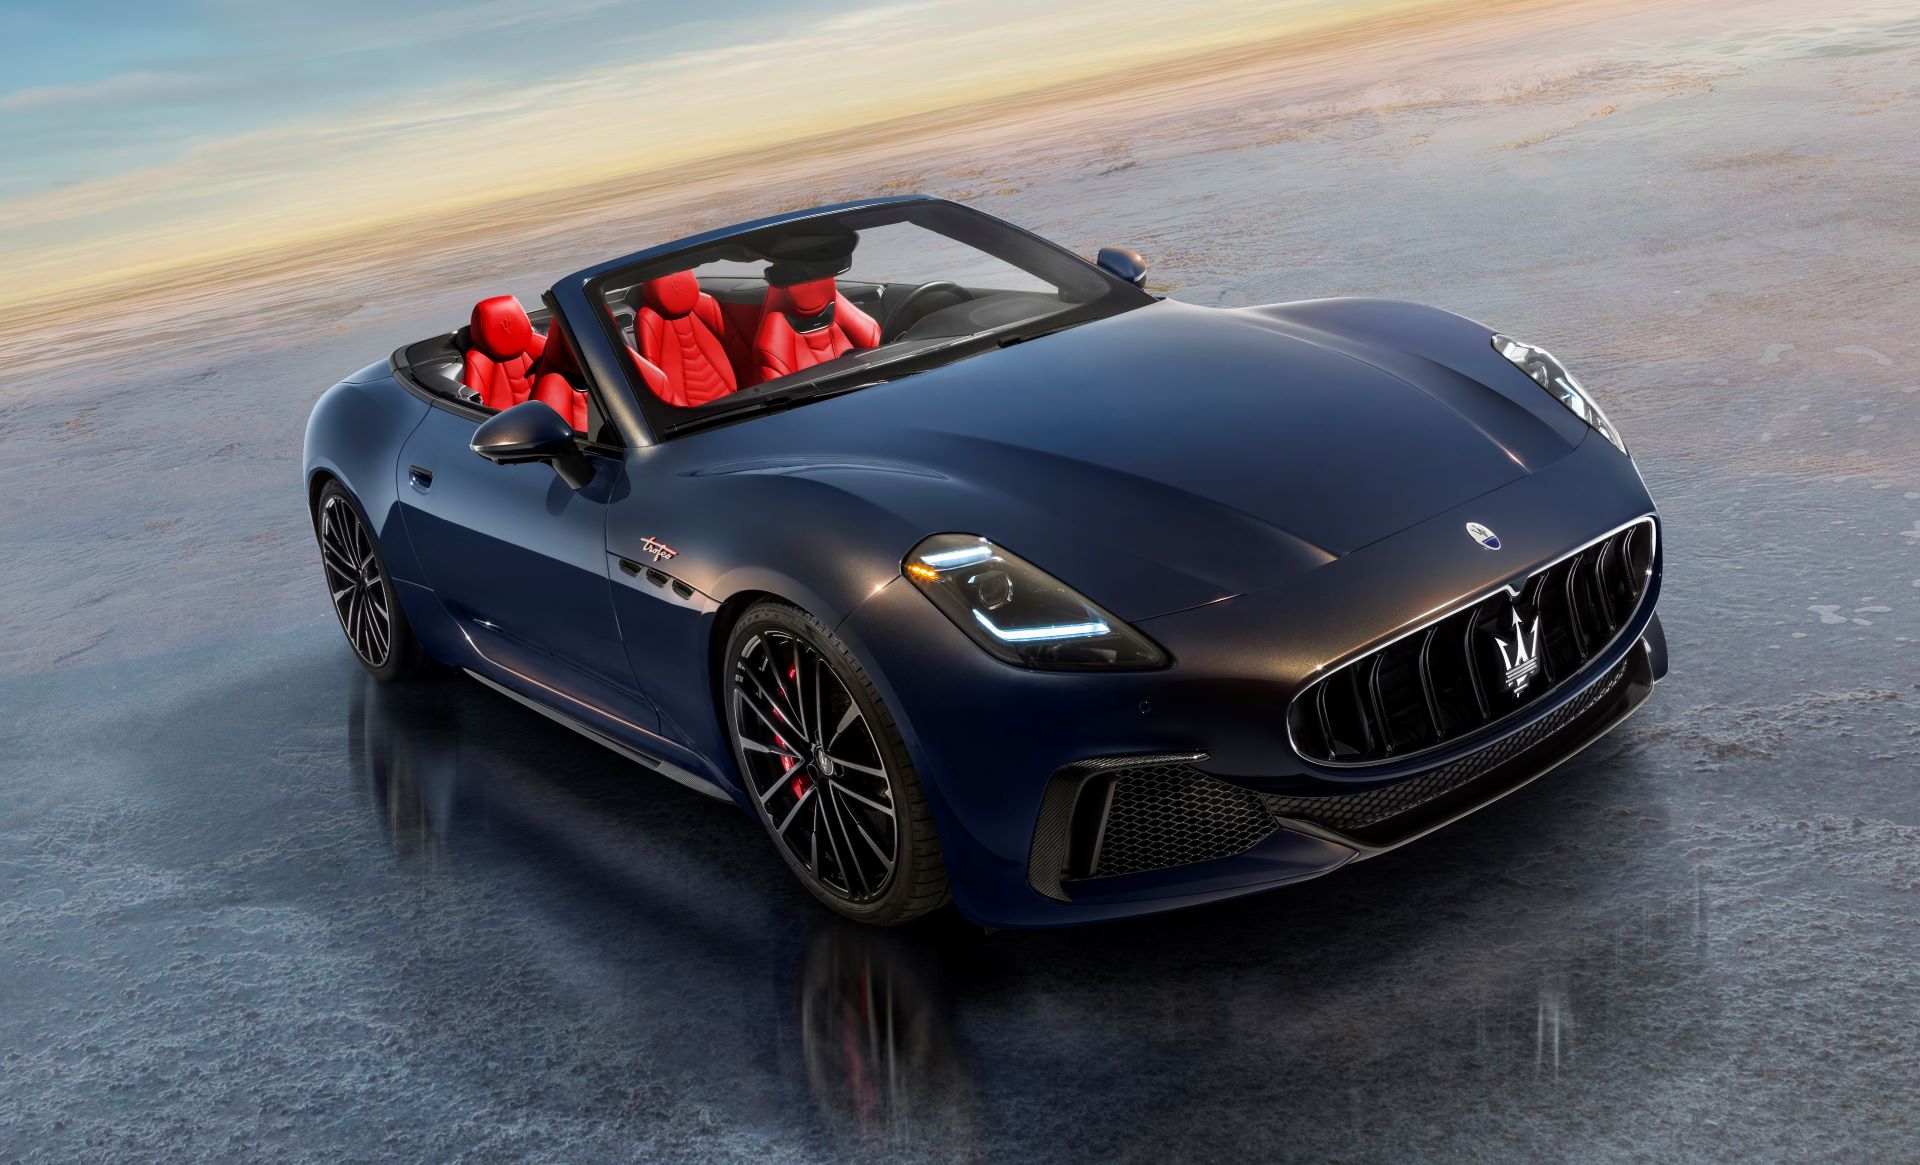 Debut of the New Maserati GranCabrio – The Trident’s New Spyder: Iconic Design and Open-Top Elegance